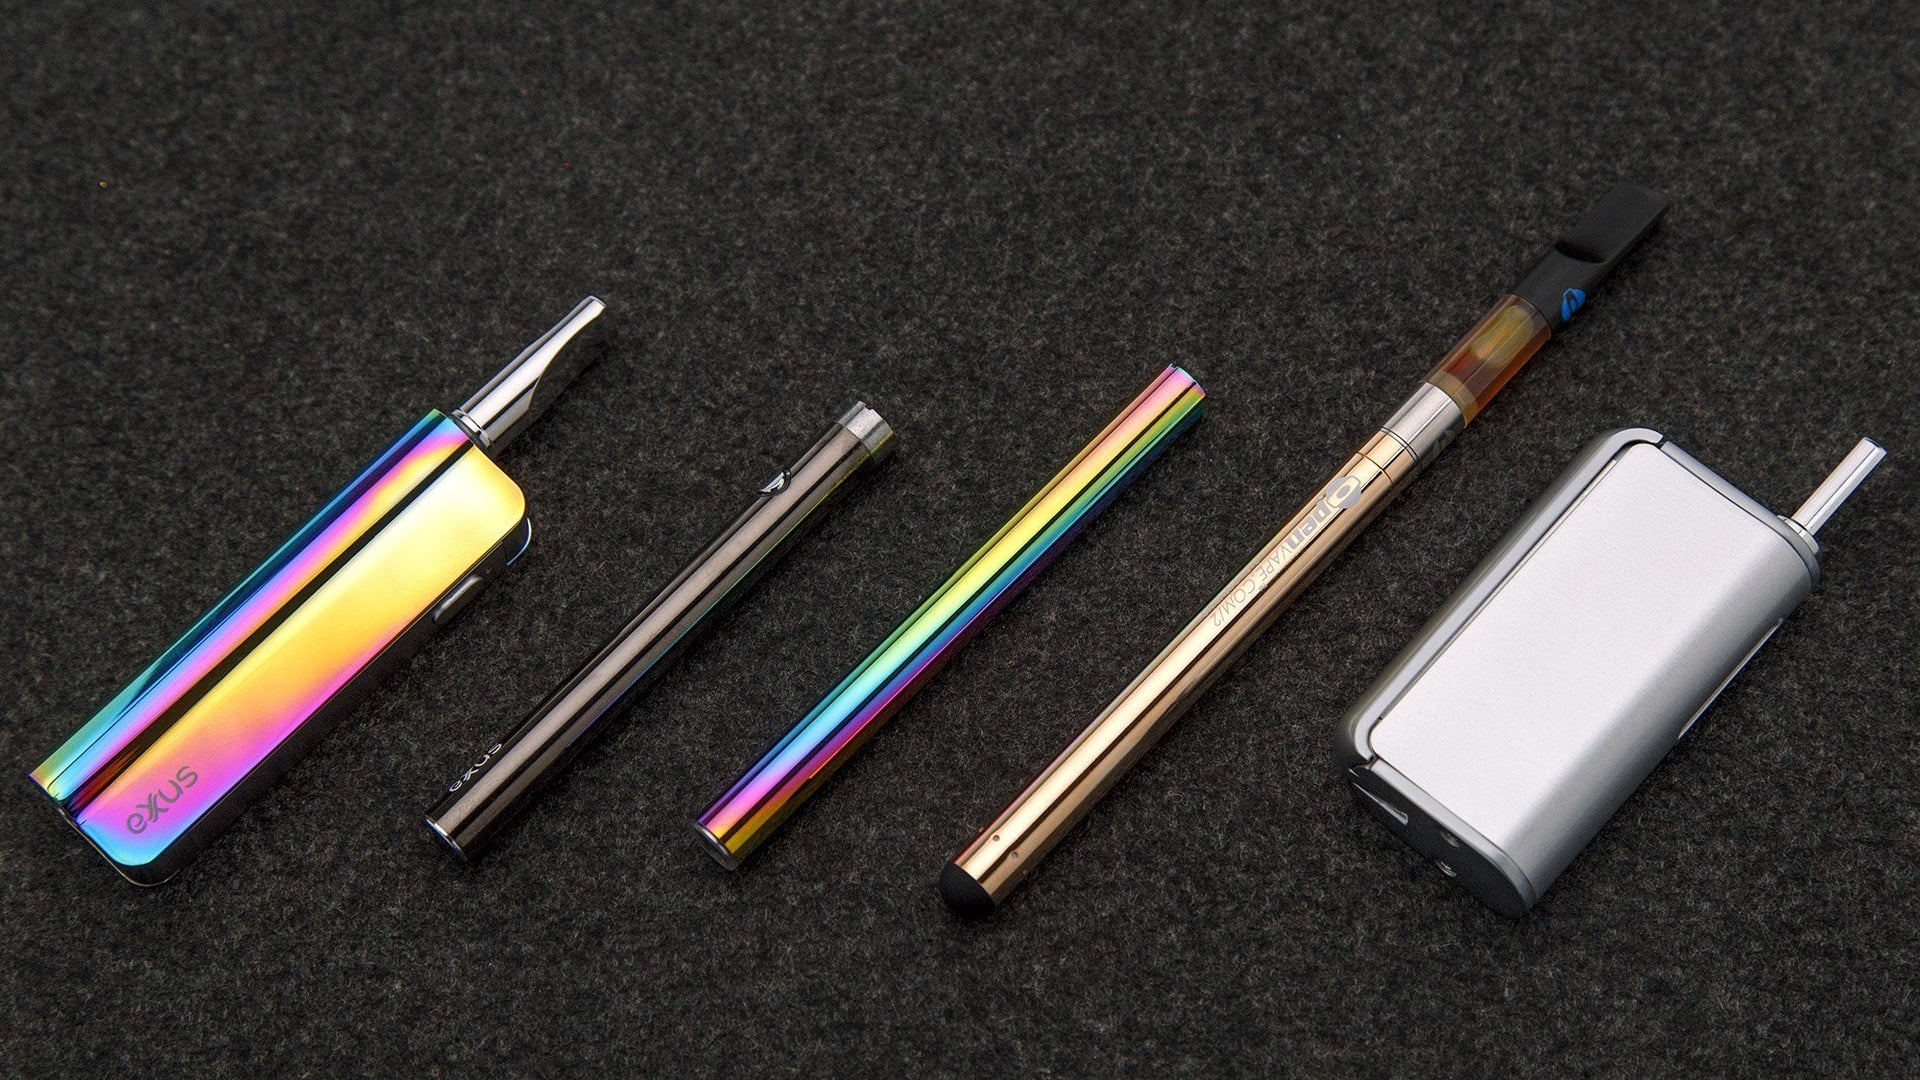 What's A Dab Pen?: A Guide to Understanding and Using Dab Pens